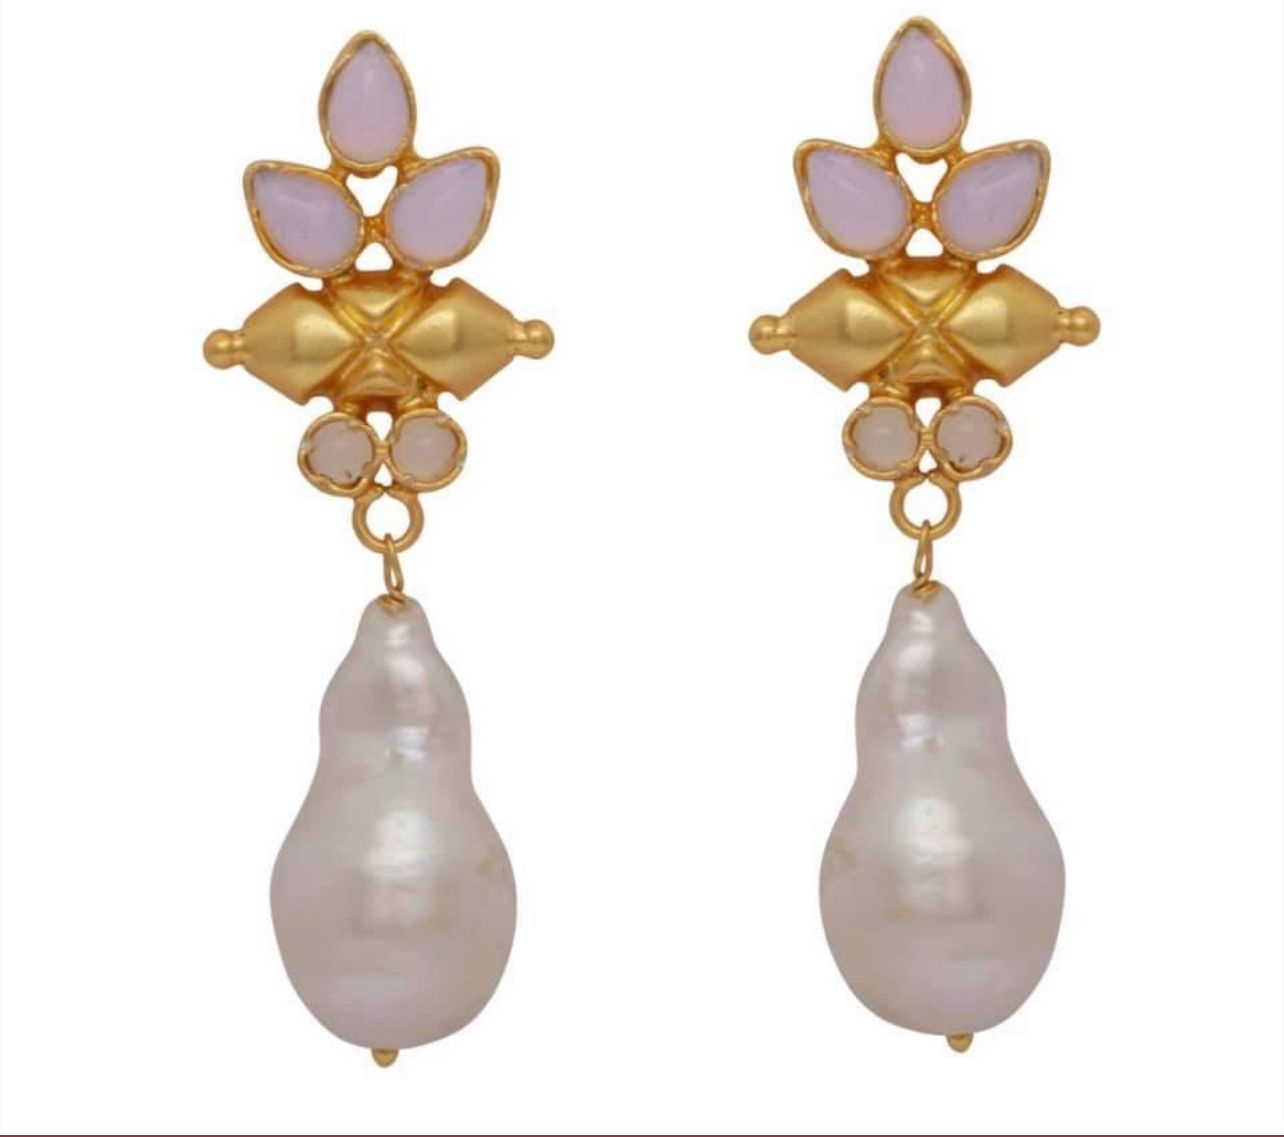 Pink chalcydony pearl drop earrings. Sterling silver with 1 micron gold.